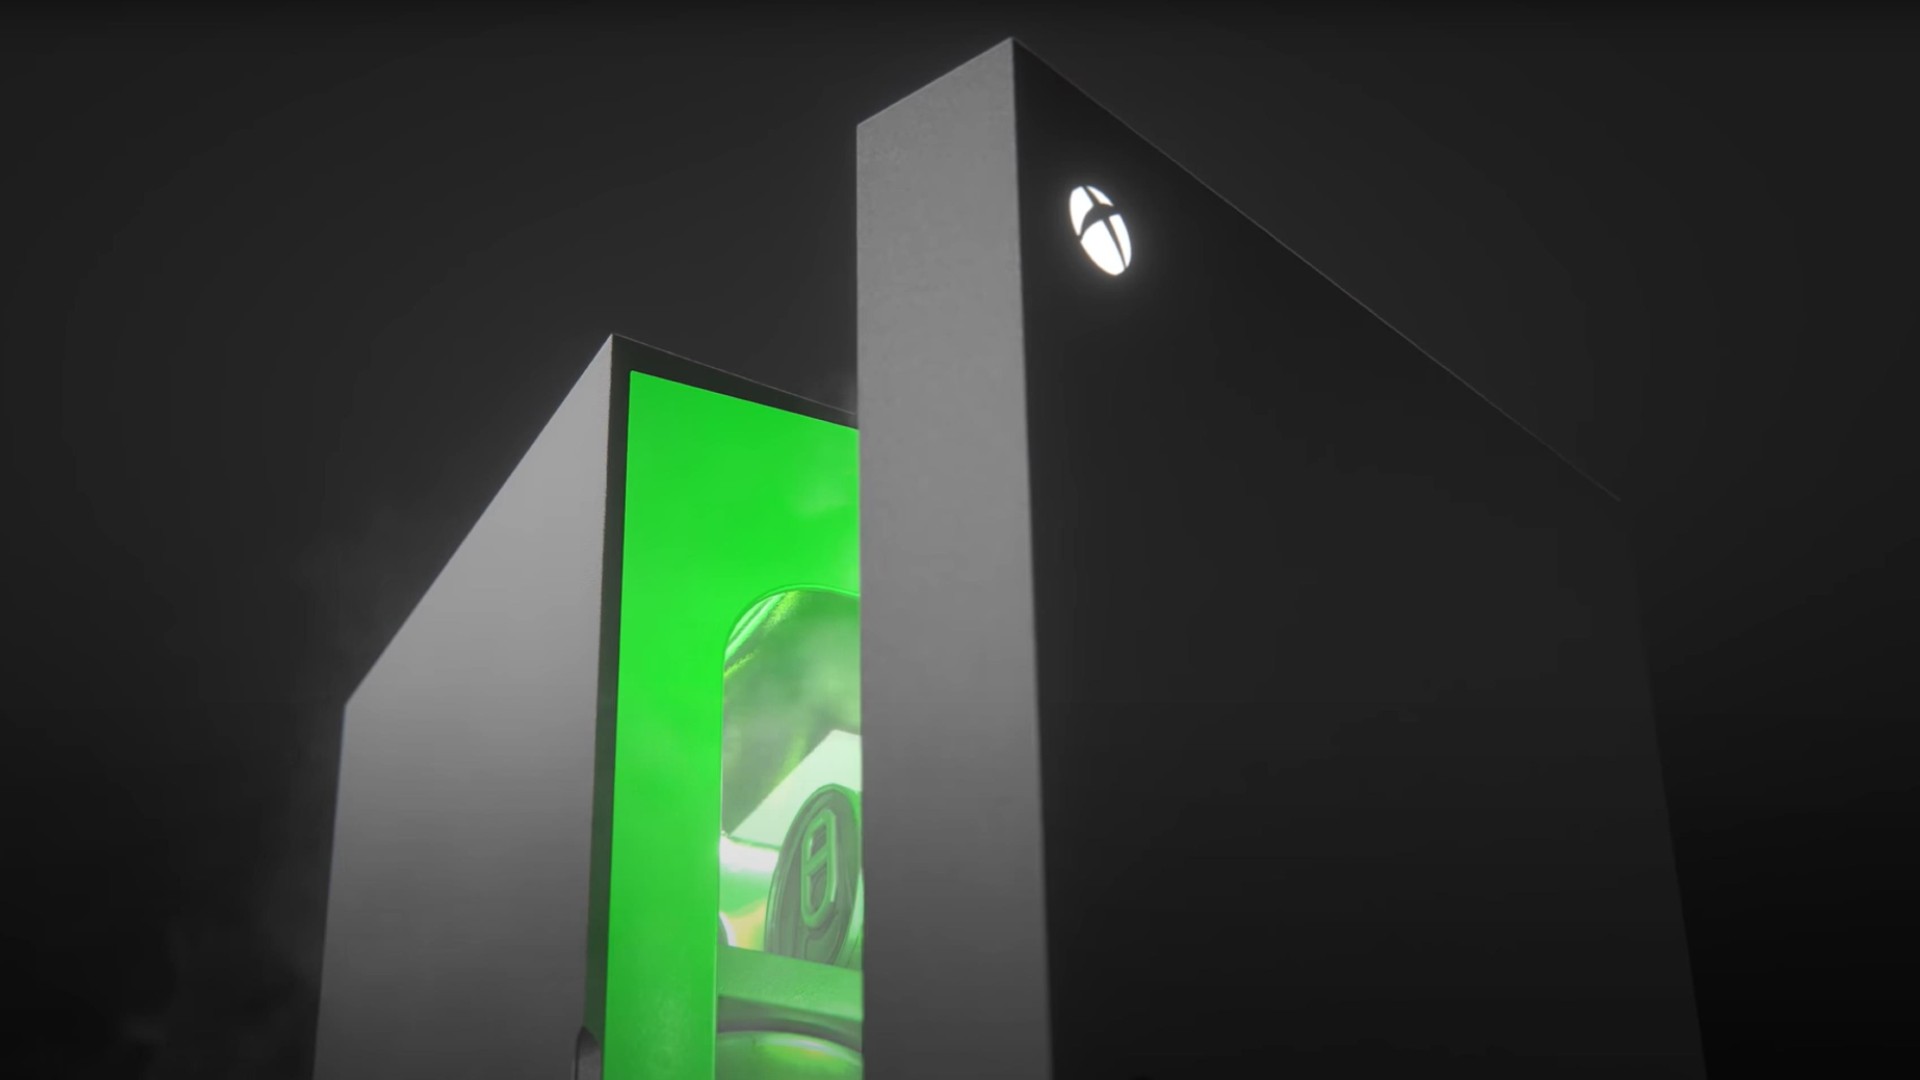 The Xbox Mini Fridge is legit and is coming Holiday 2021